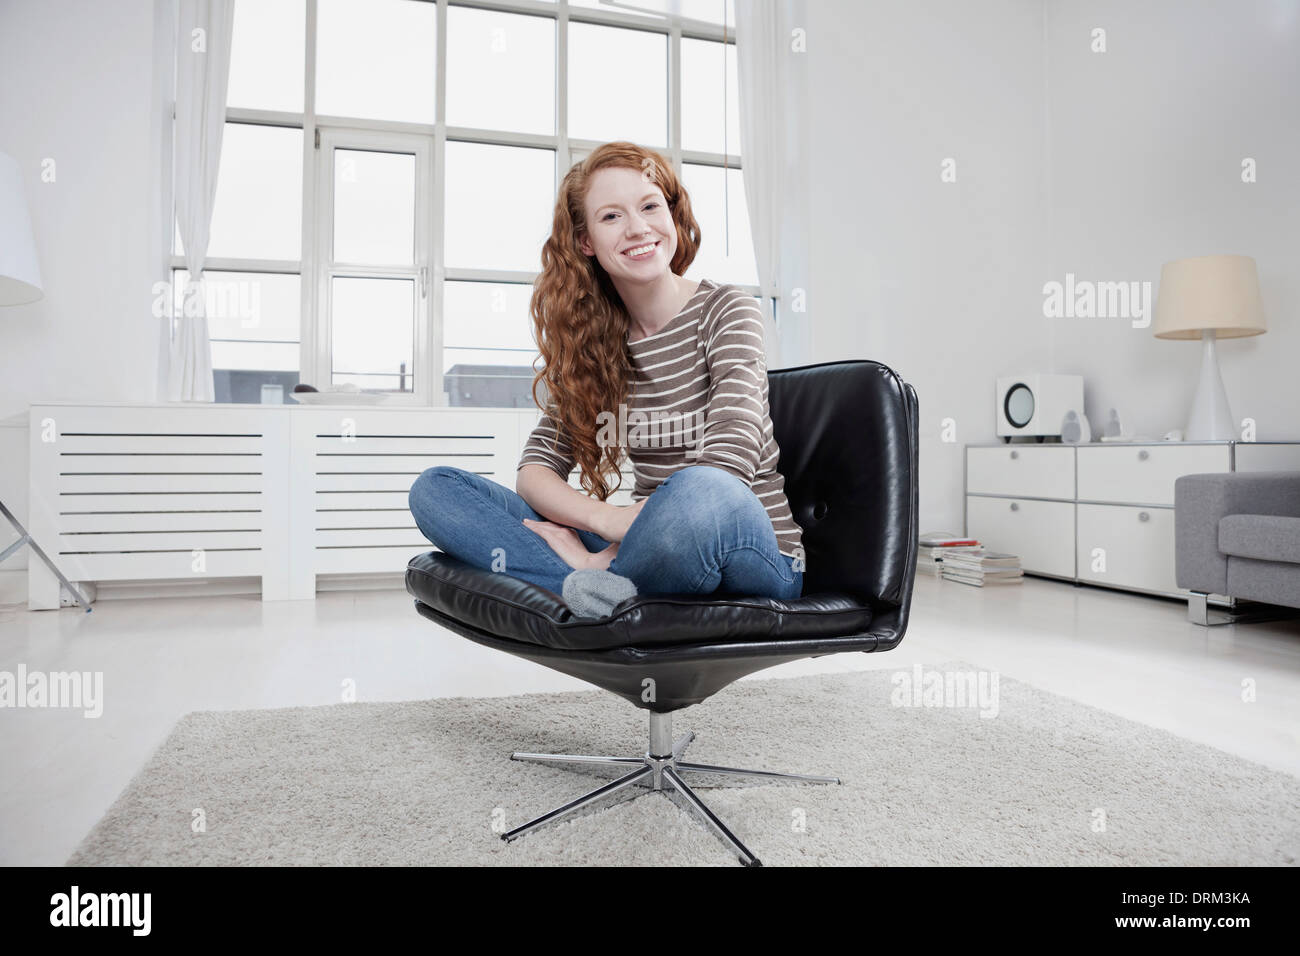 Germany, Munich, Woman at home, sitting in chair cross